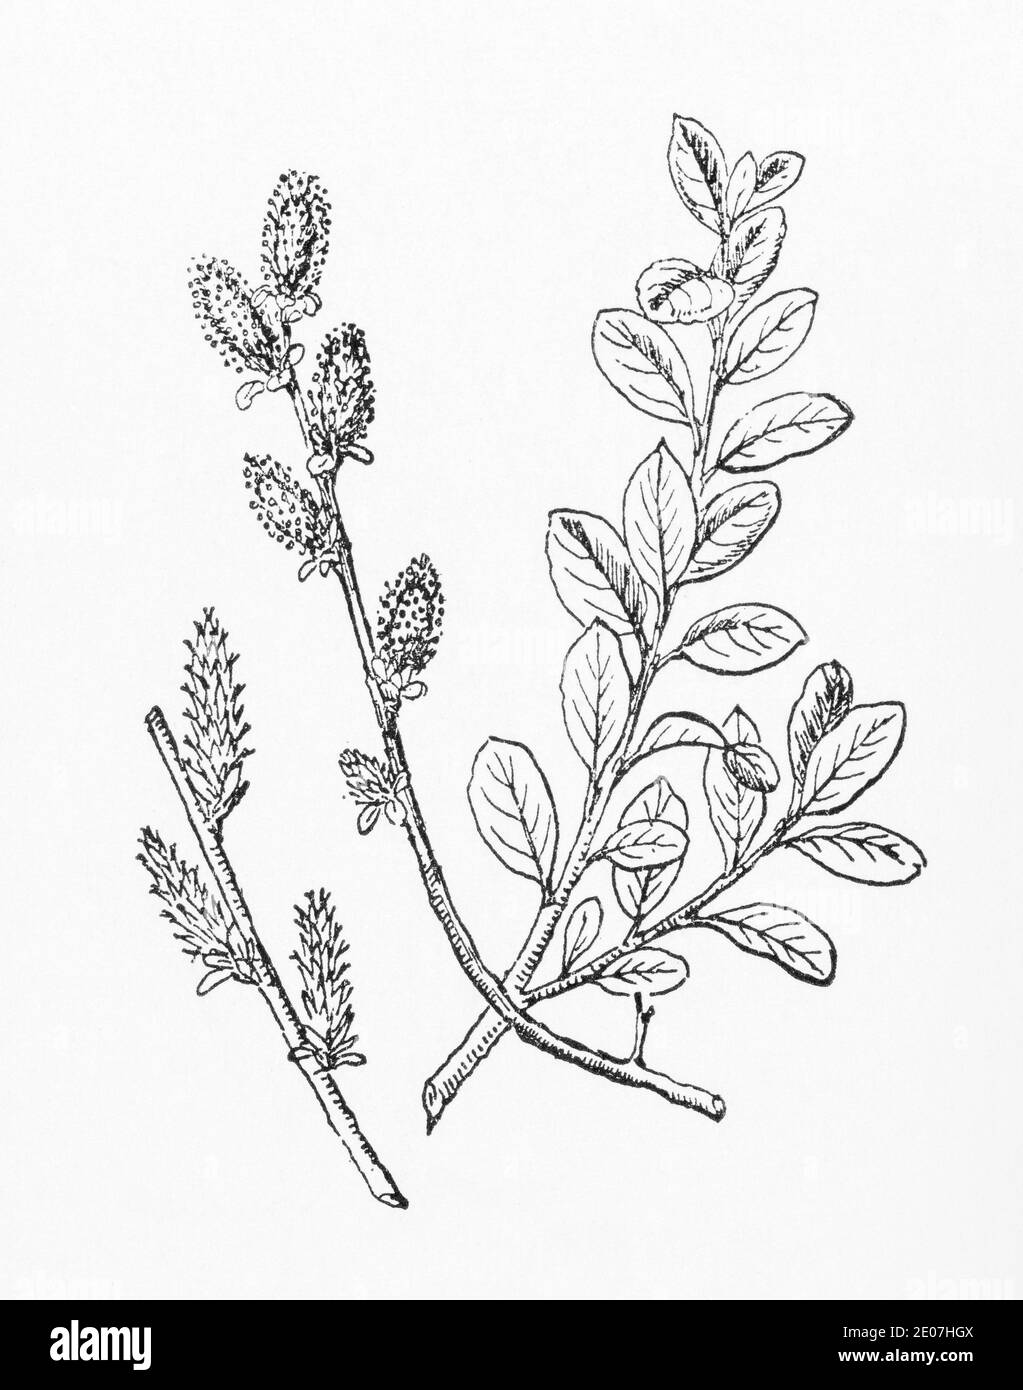 Old botanical illustration engraving of Creeping Willow, Dwarf Willow / Salix repens. Traditional medicinal herbal plant. See Notes Stock Photo